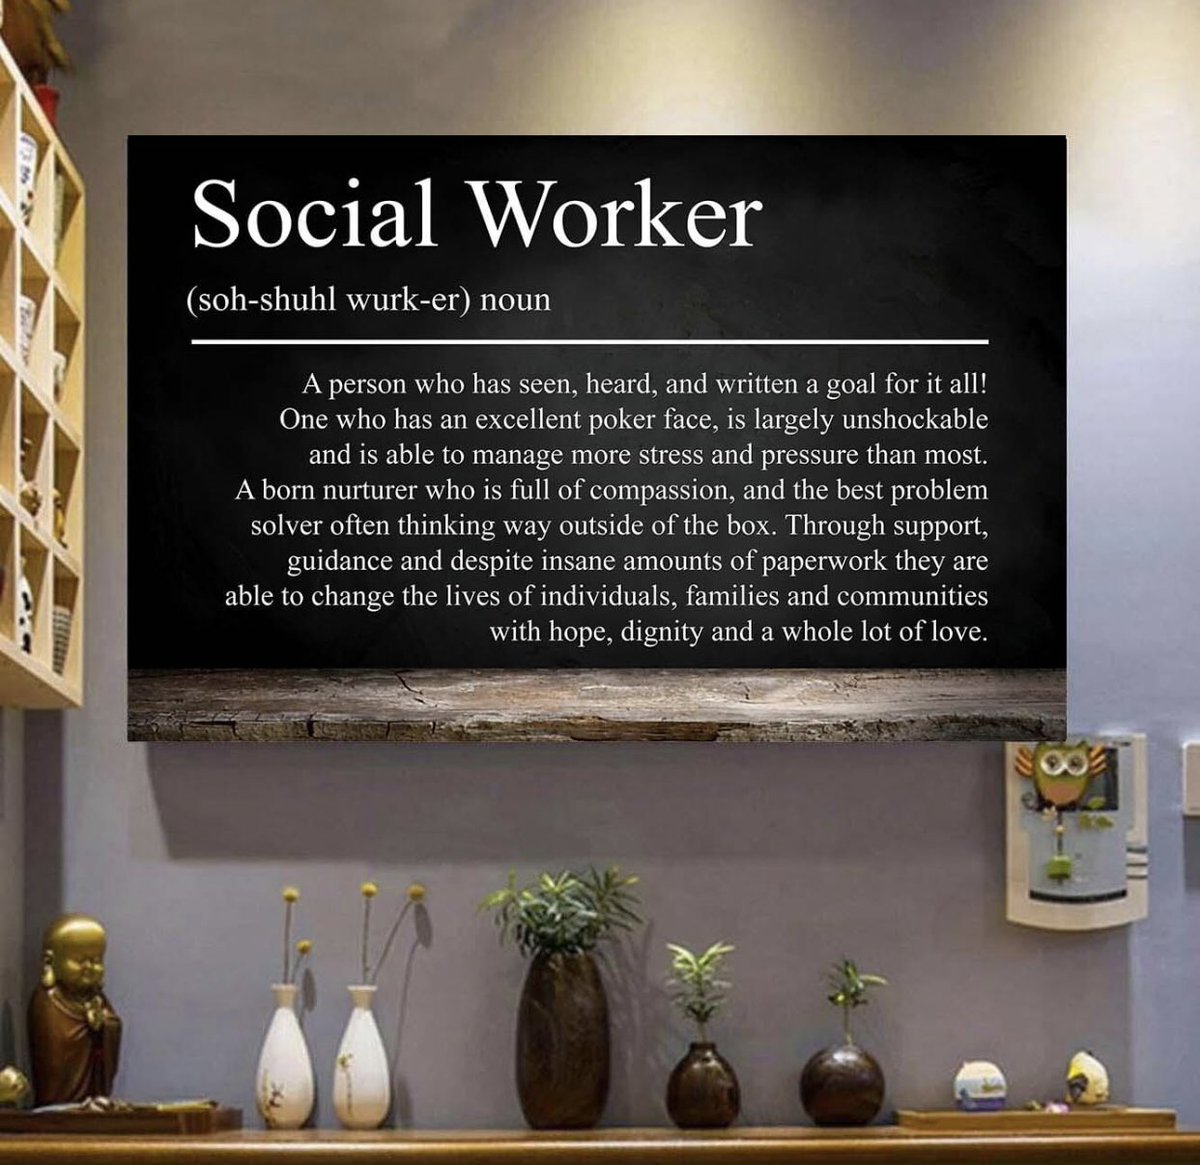 Social Workers are behind the scenes kind of folks & don’t like attention. We don’t do it for the money, but to make a difference. We are full of compassion, empathy, fire for injustice & desire to support the vulnerable @ngpschools #SocialWorkWeek2021 #SocialWorkIsEssential